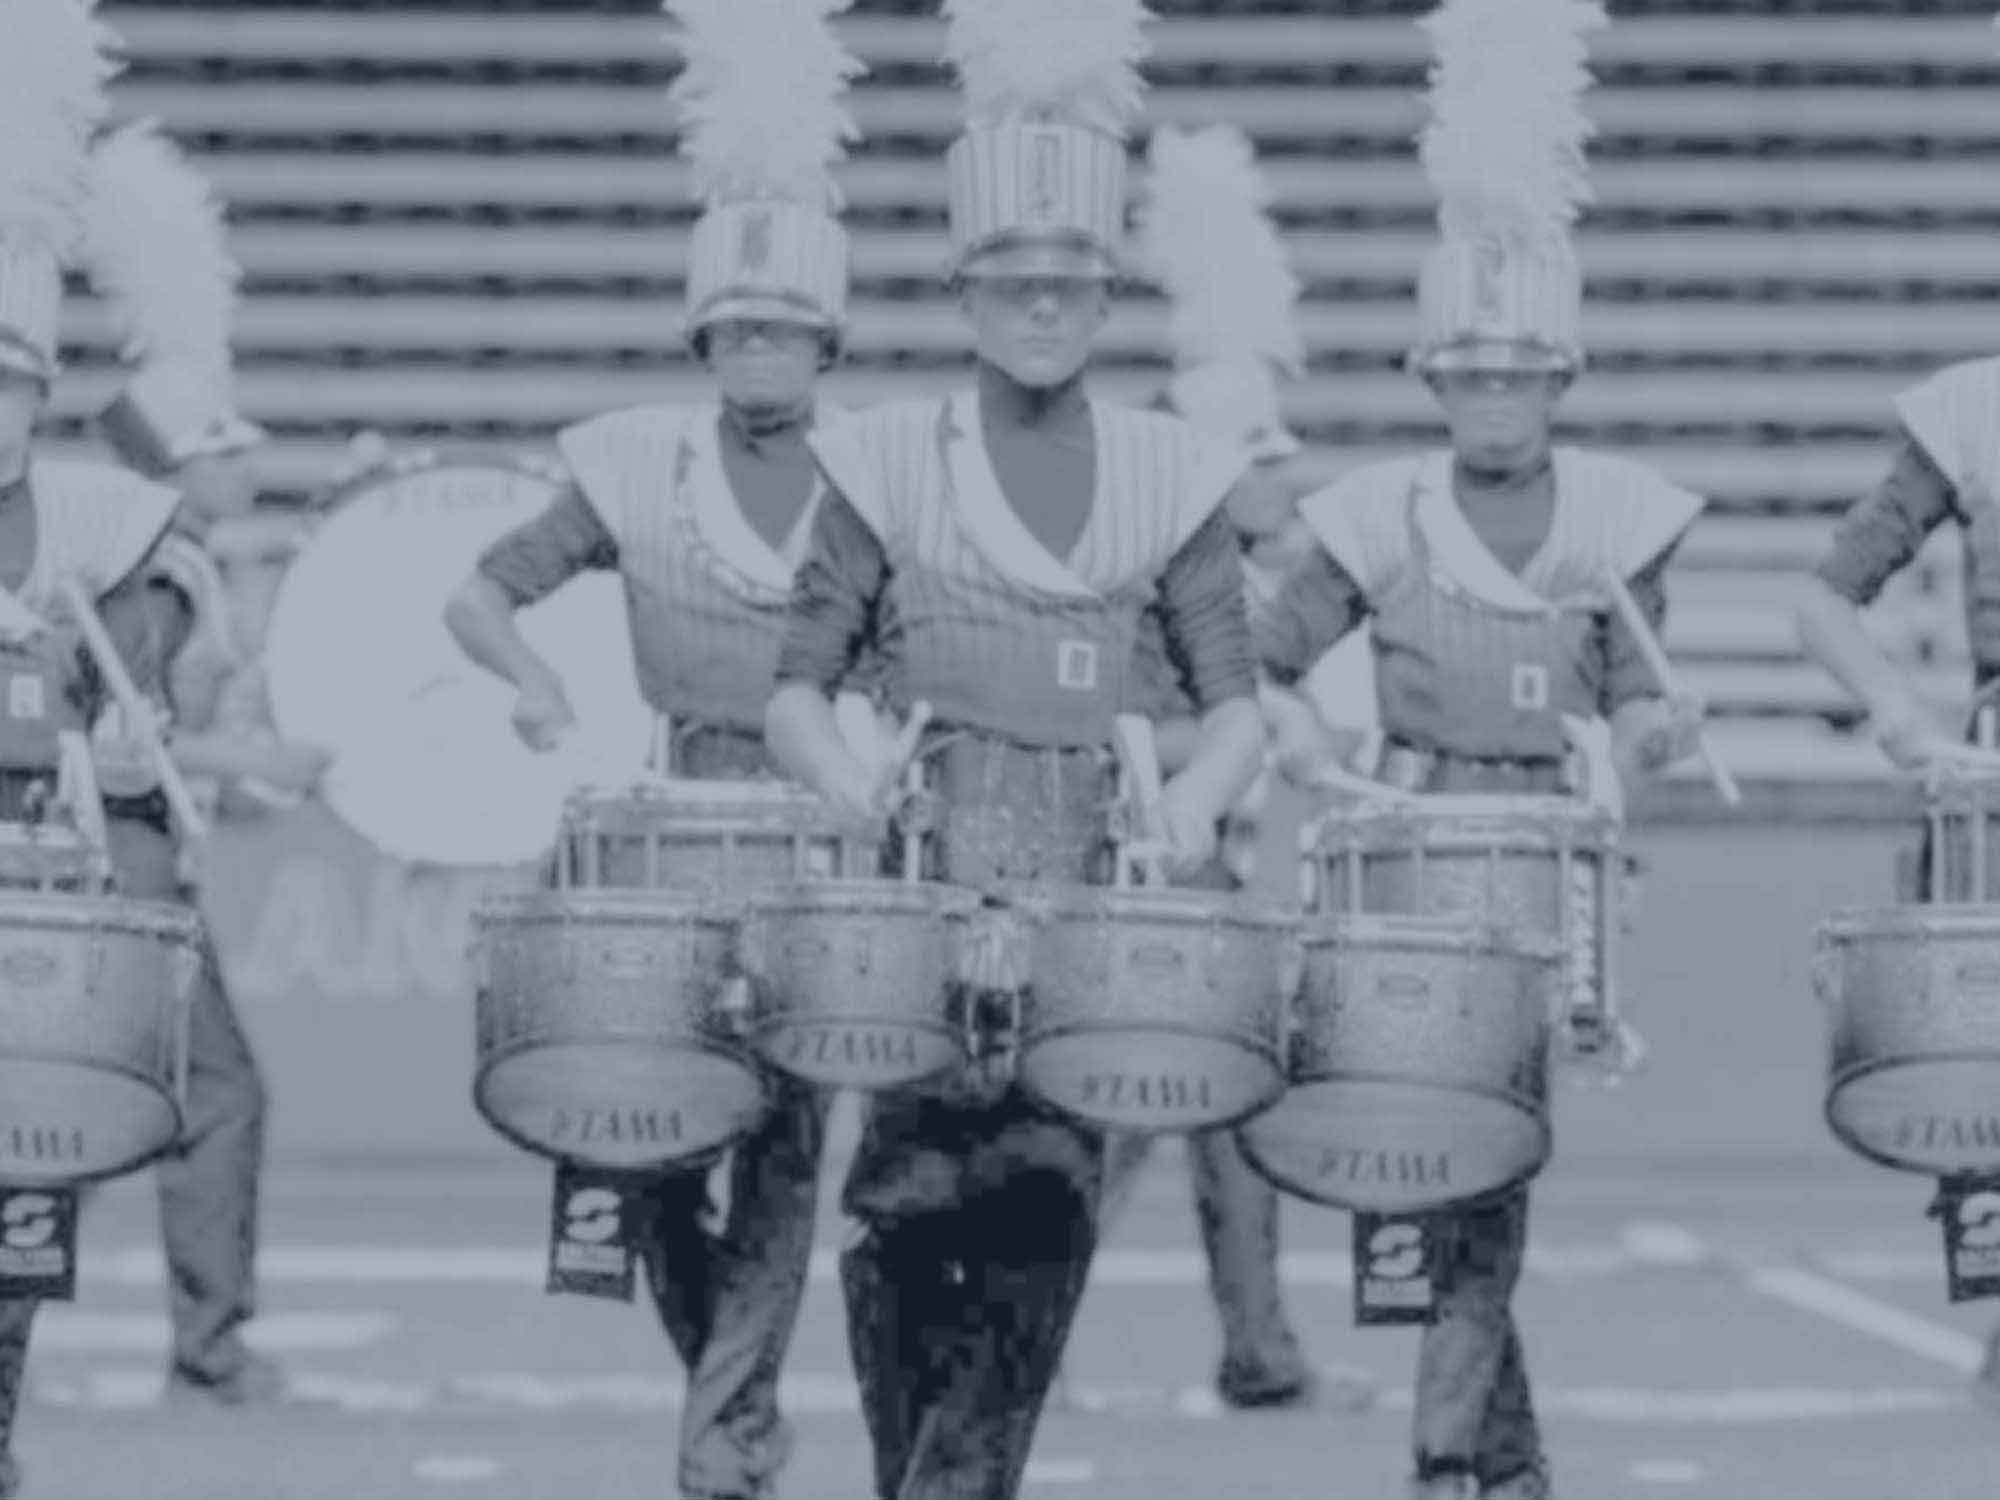 Should Marching Band Participation Be Required in High School Music Programs?